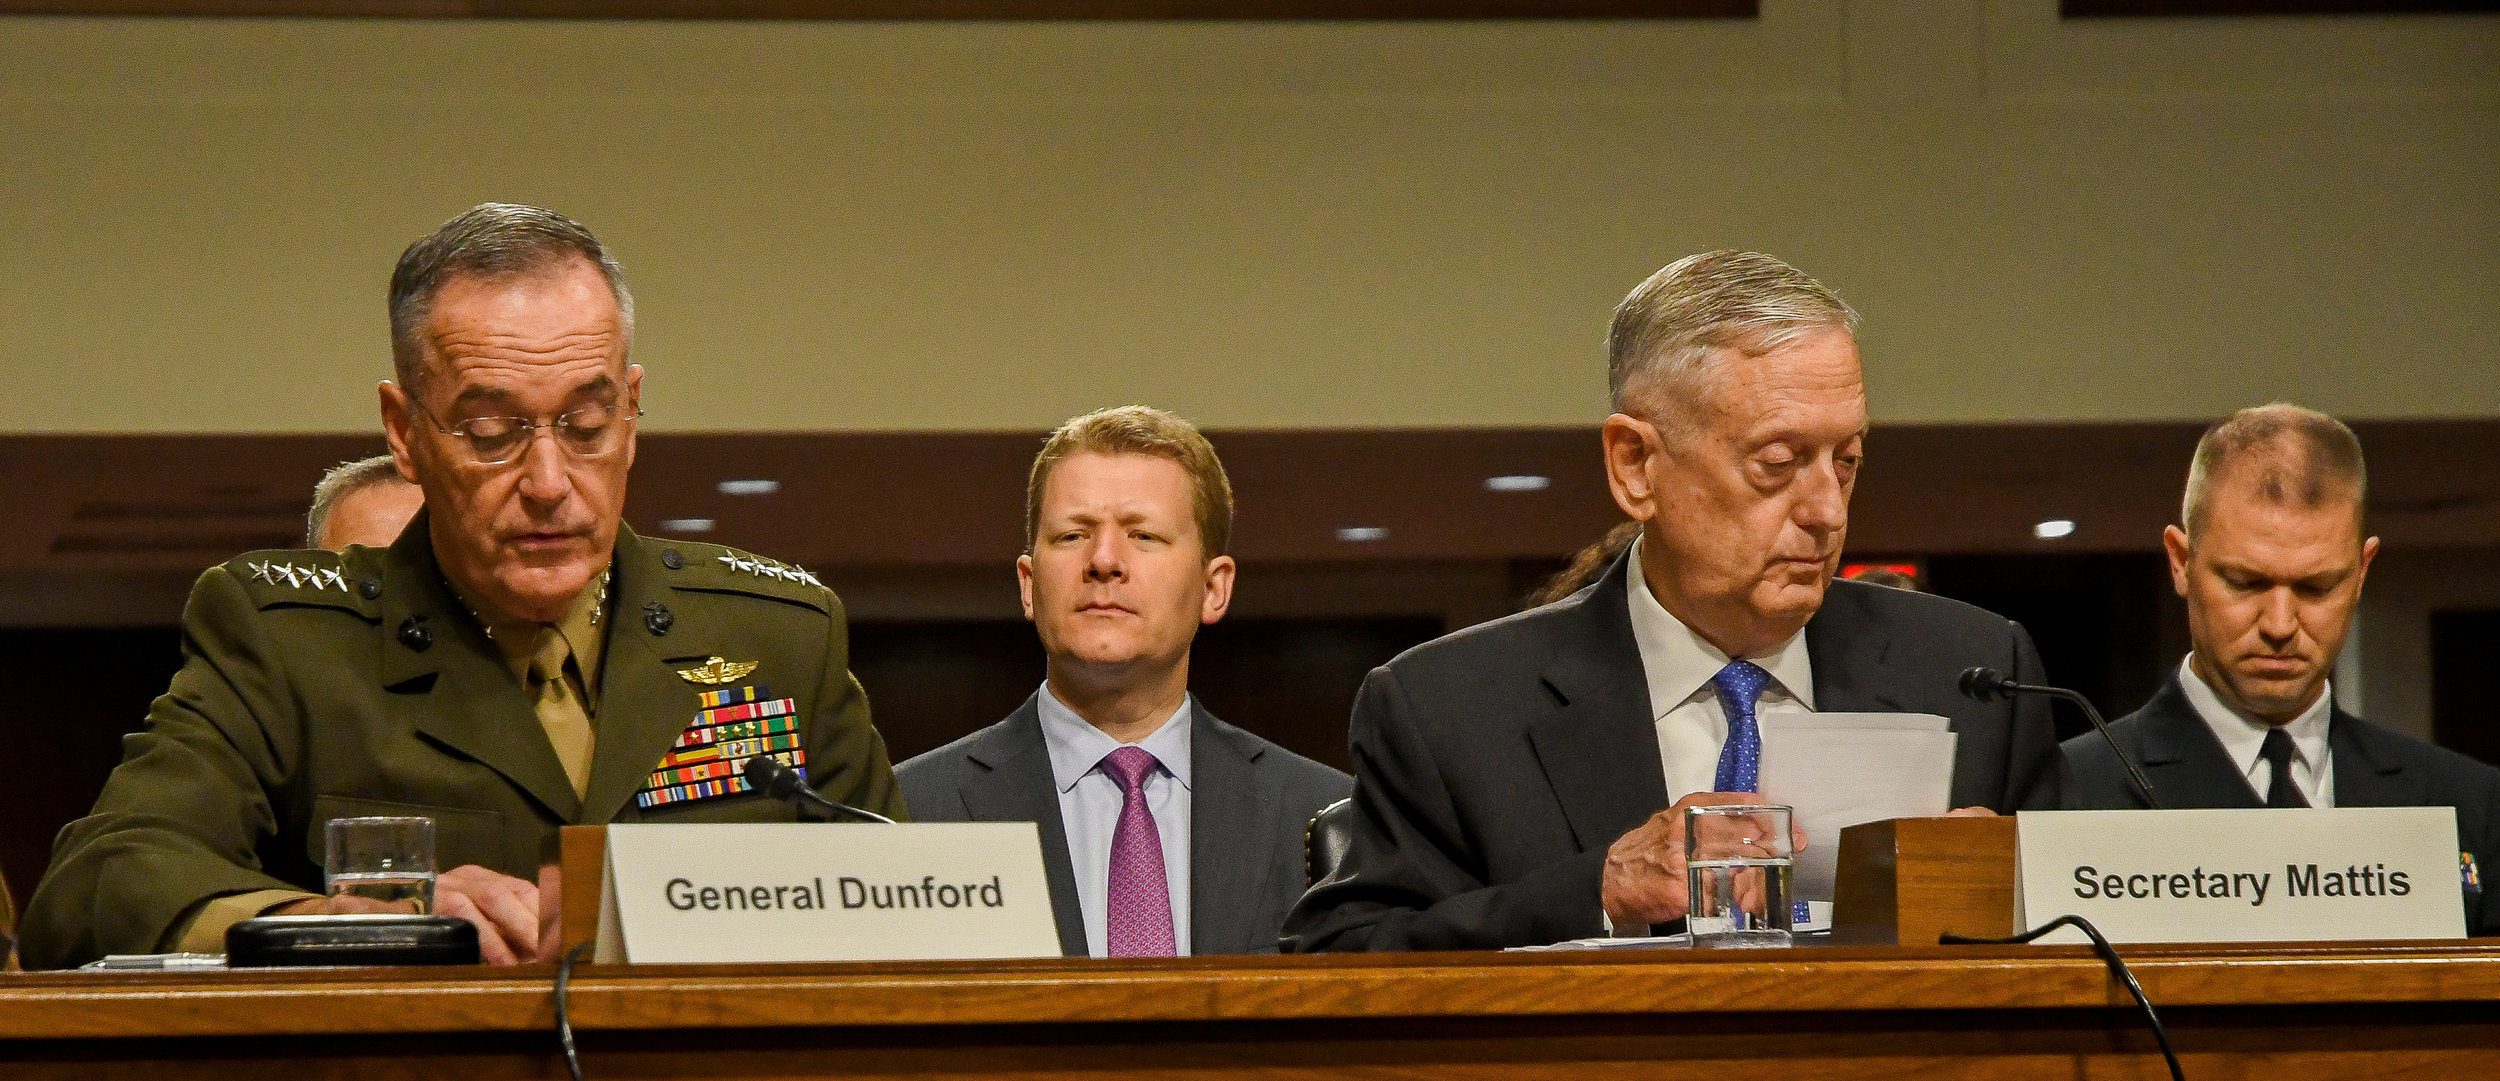 Washington DC. USA, June 13, 2017. PICTURED: Secretary of Defense James Mattis and Army Chief of Staff General Dunford, take questions in appropriations committee. Mattis and Dunford both agree that climate change is a significant national security …